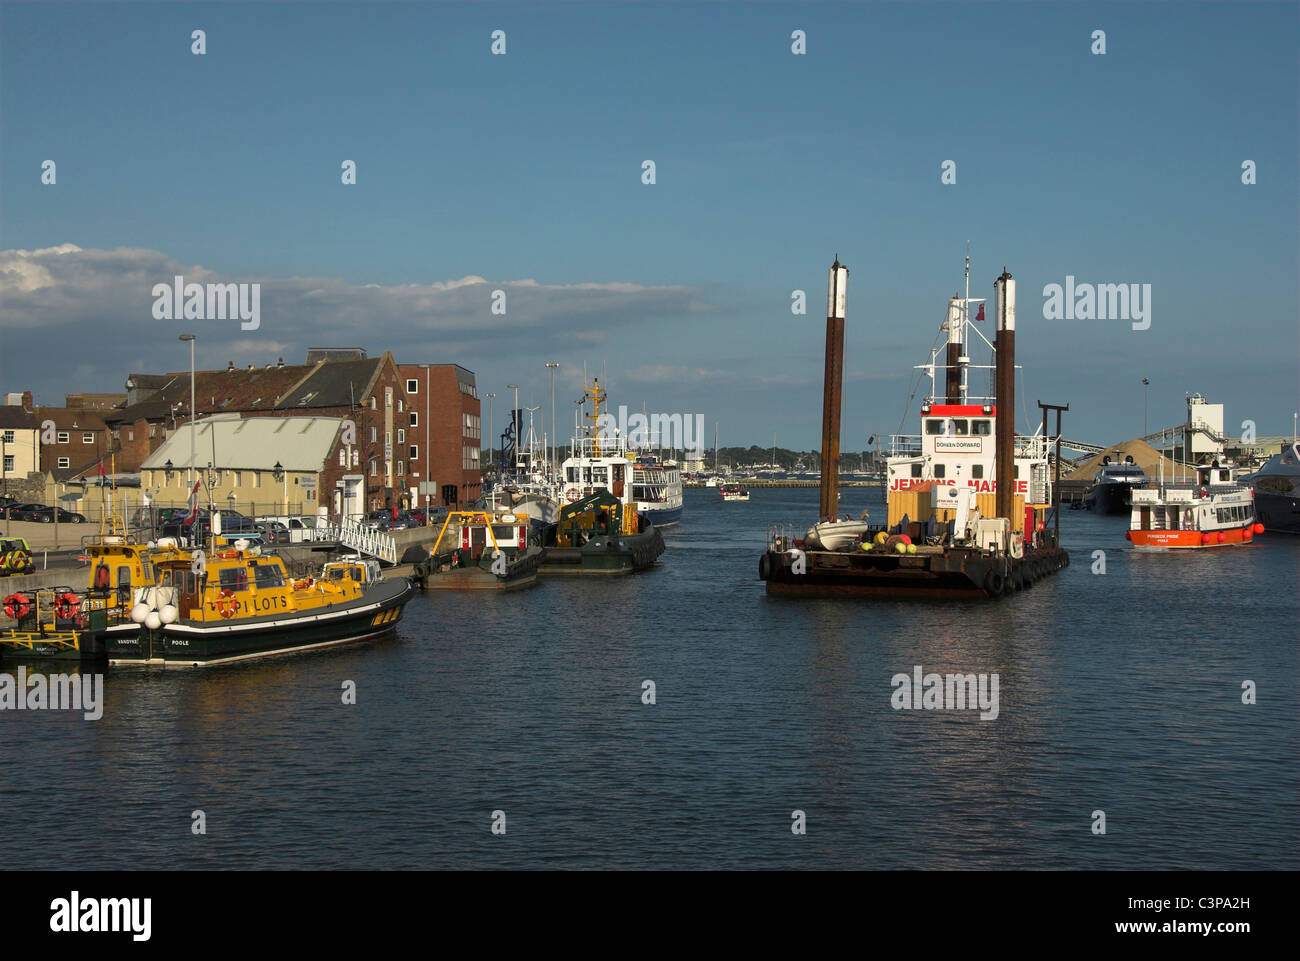 Poole Quay, Dorset, with a dredger and other boats in the picture UK Stock Photo